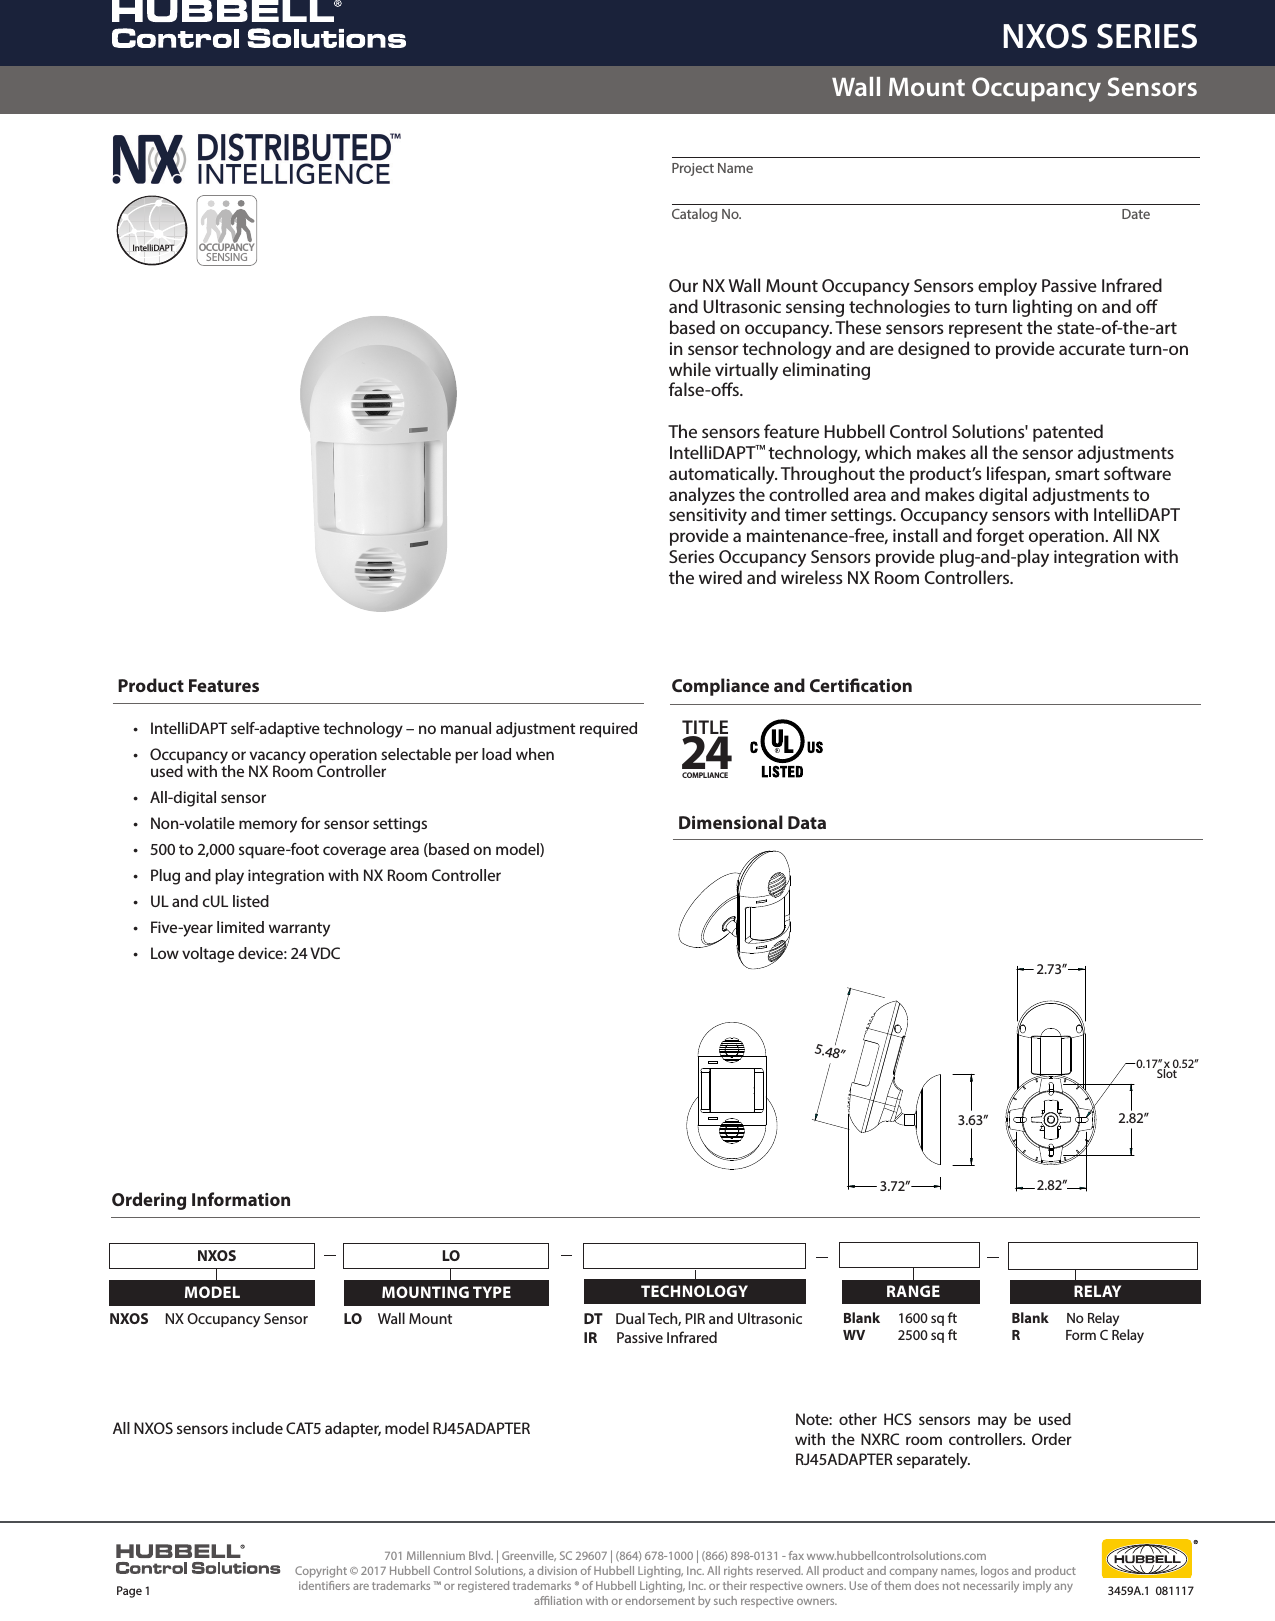 Page 1 of 2 - NX Wall Mount Occupancy Sensors Specification Sheet